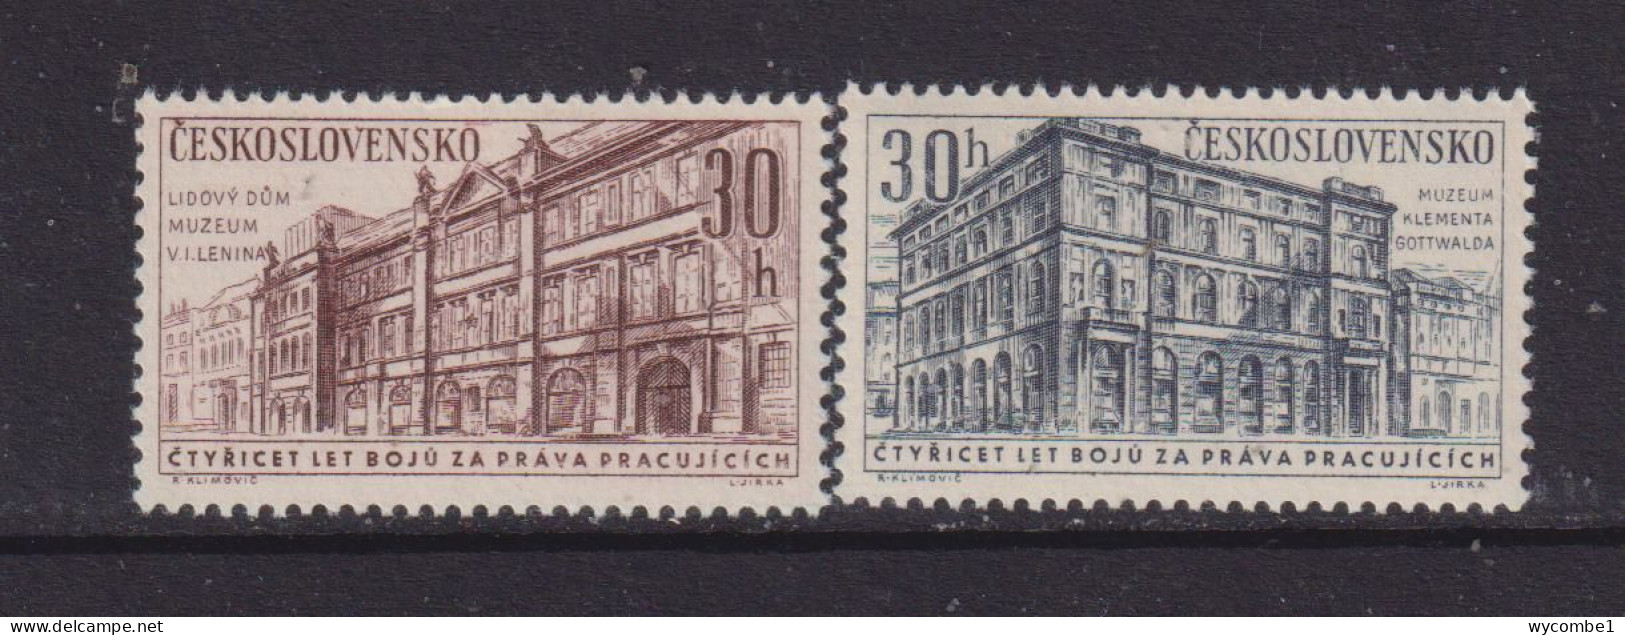 CZECHOSLOVAKIA  - 1961 Communist Party Set Never Hinged Mint - Unused Stamps